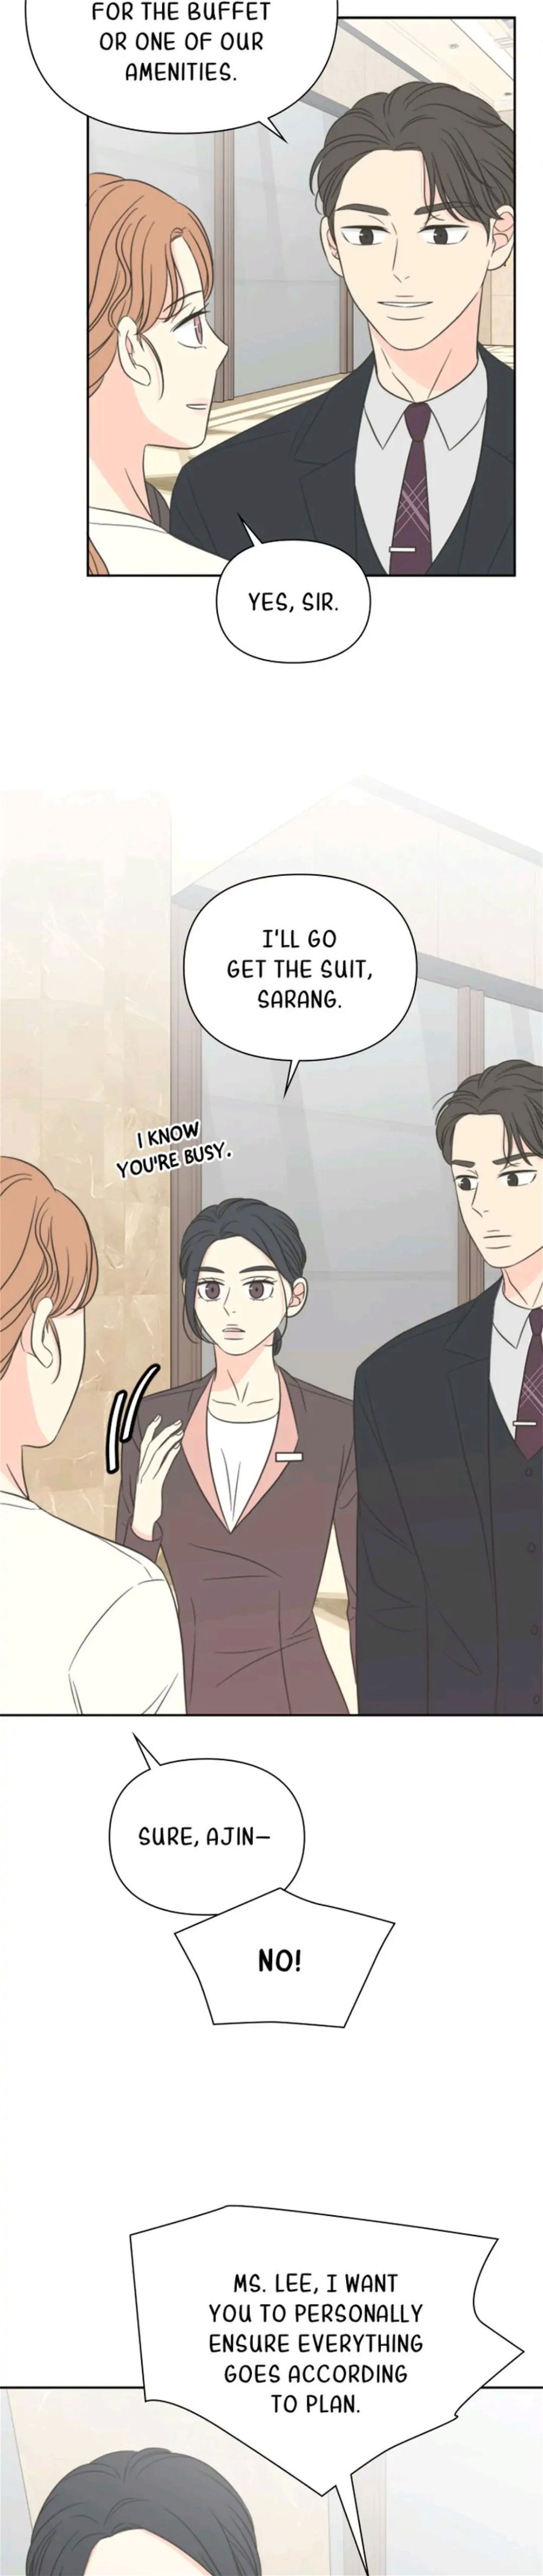 Check In to My Heart chapter 8 - Page 12